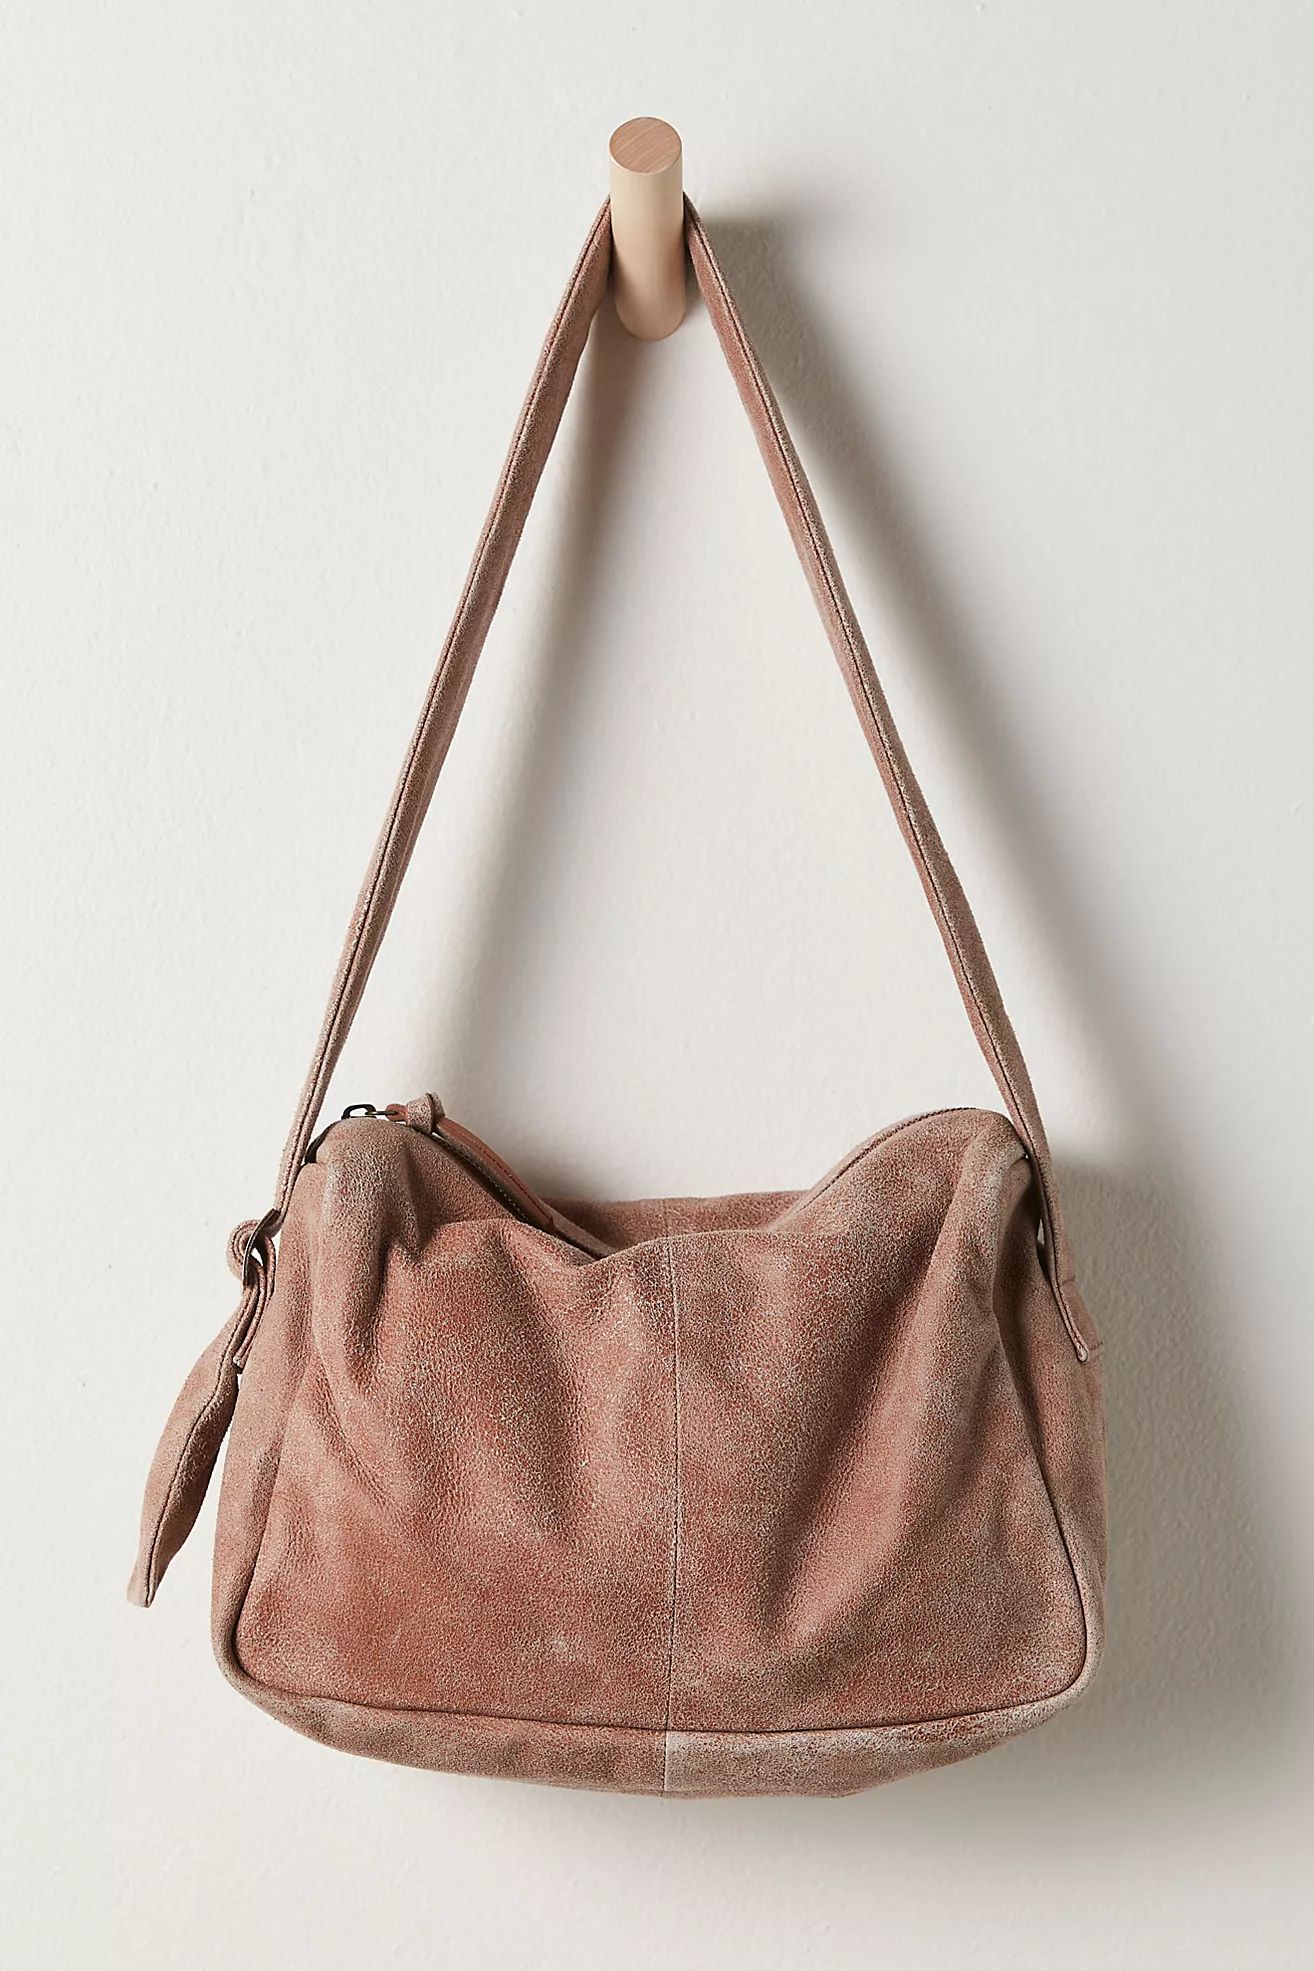 Replay Leather Shoulder Bag | Free People (Global - UK&FR Excluded)